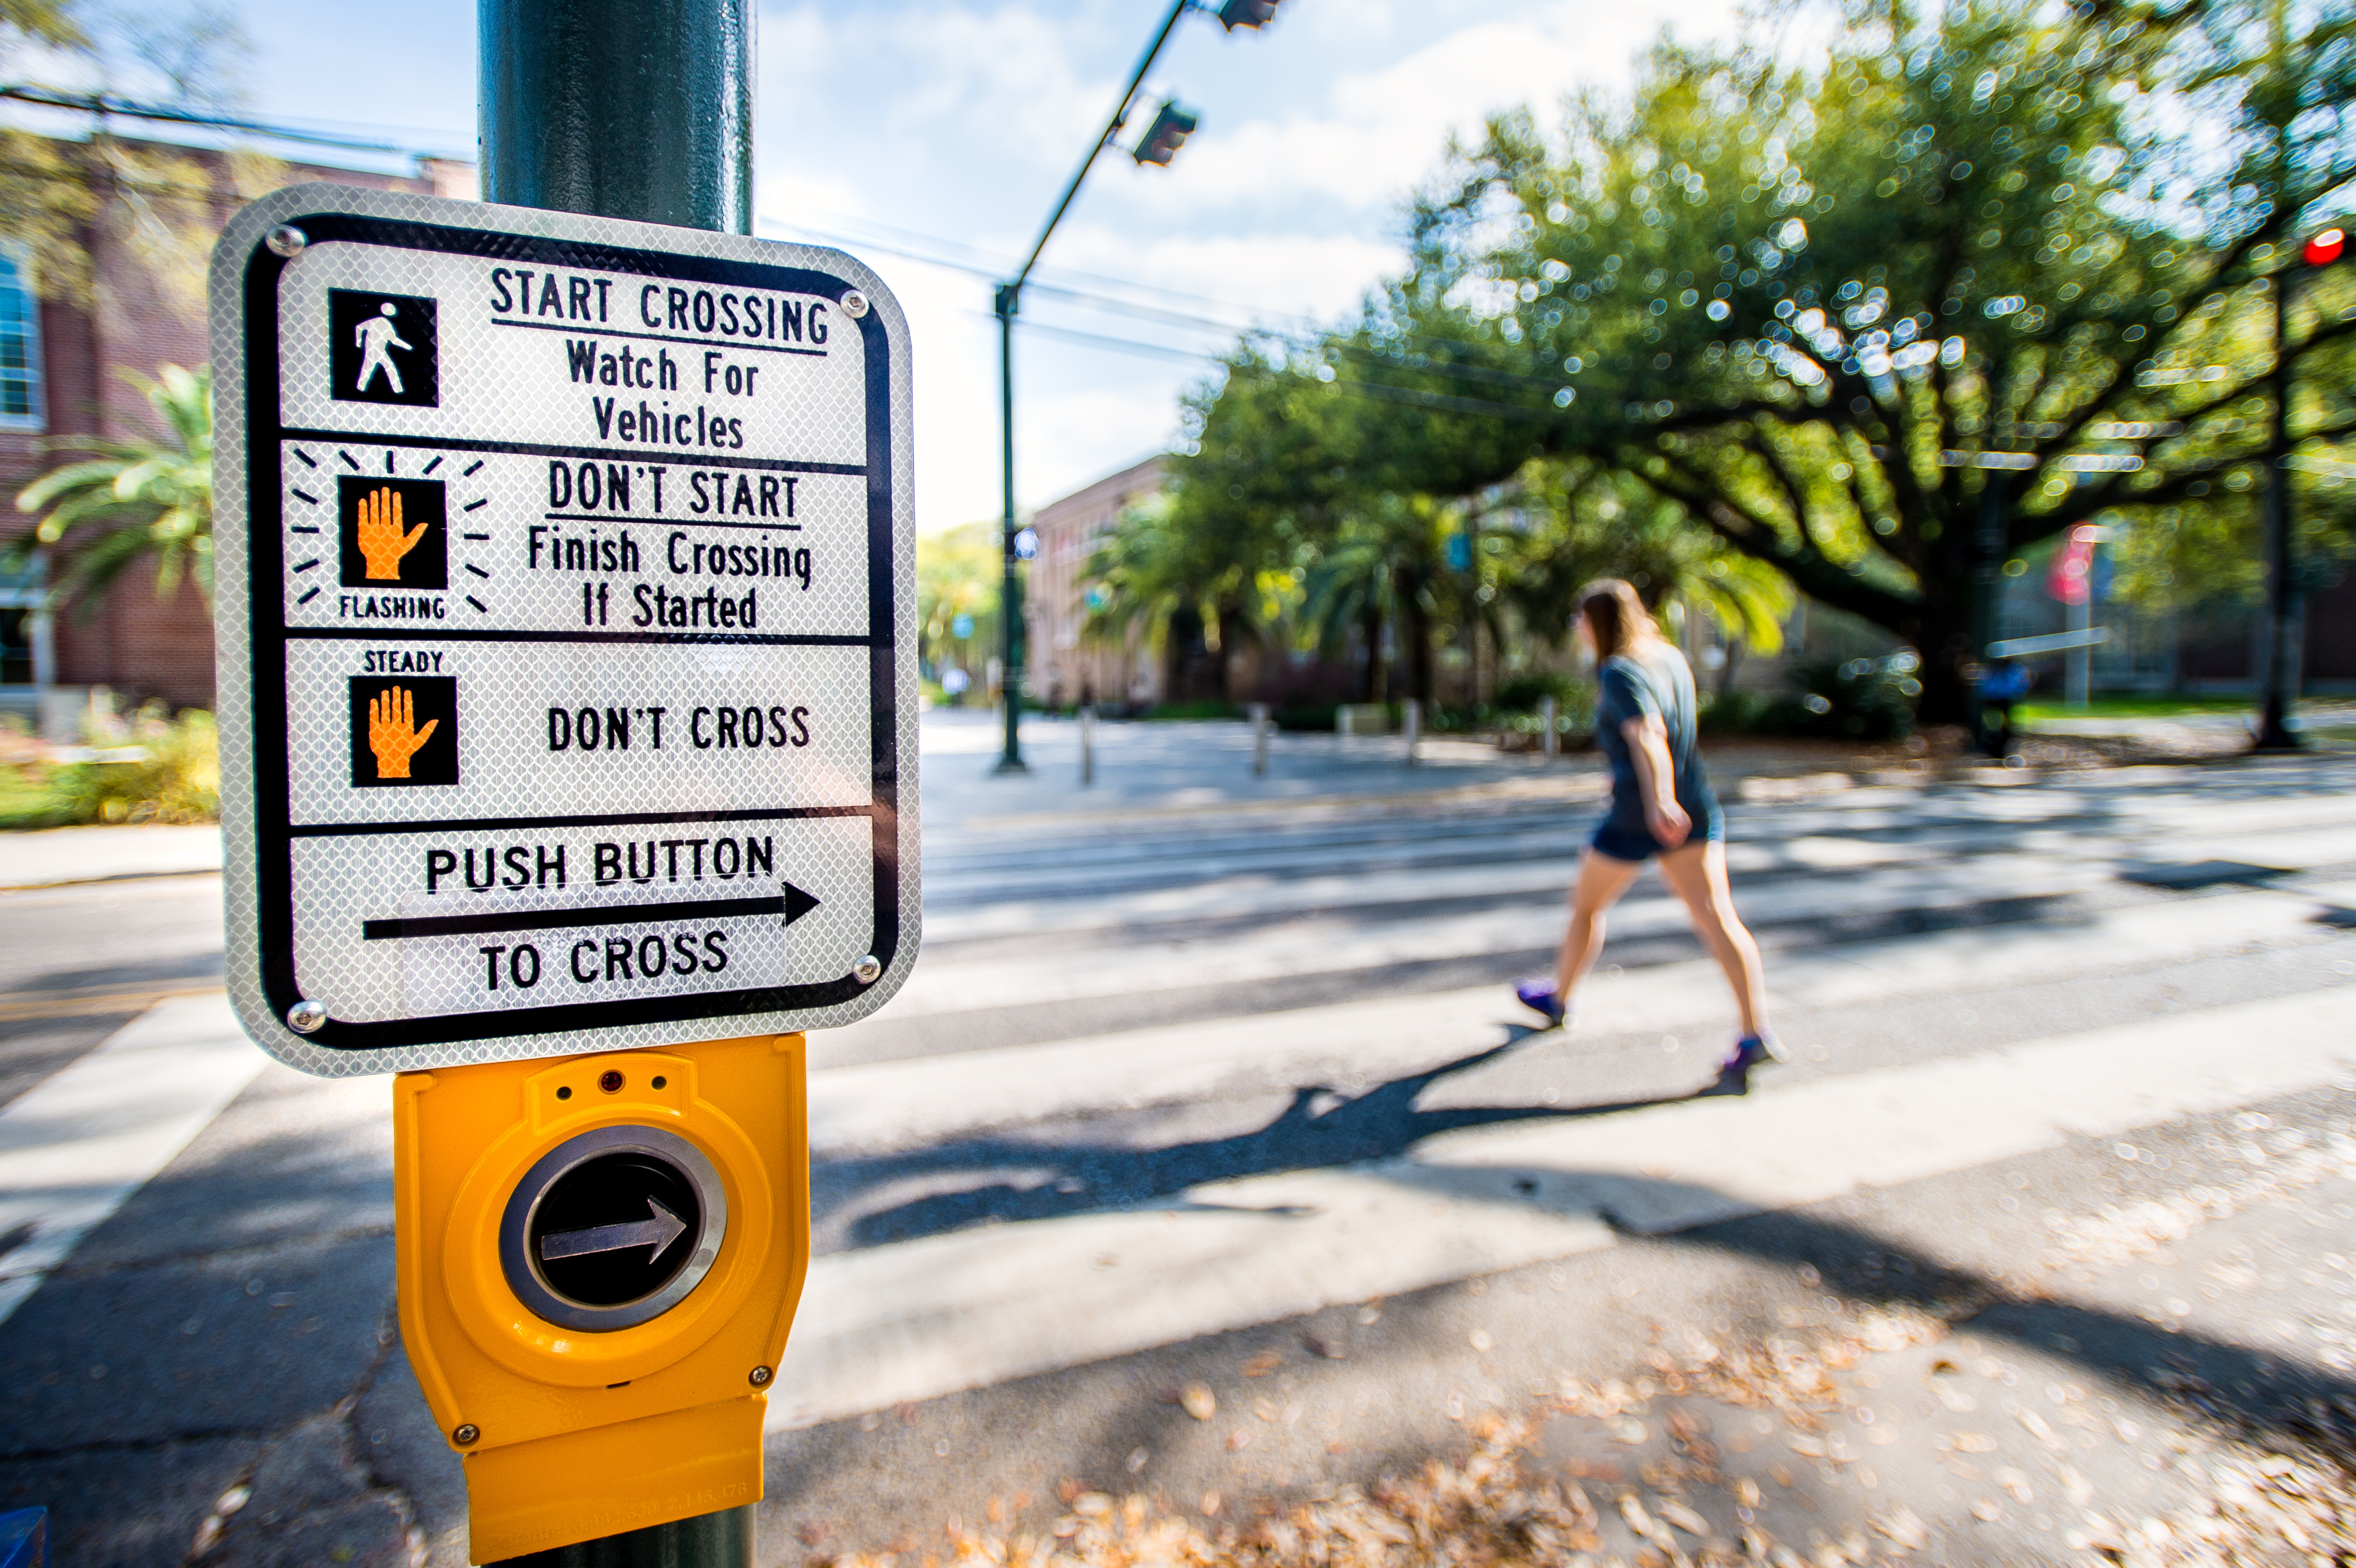 Pictured is an Accessible Pedestrian Signal (APS) at Freret and McAlister that beeps in order to help the visually impaired cross the street.